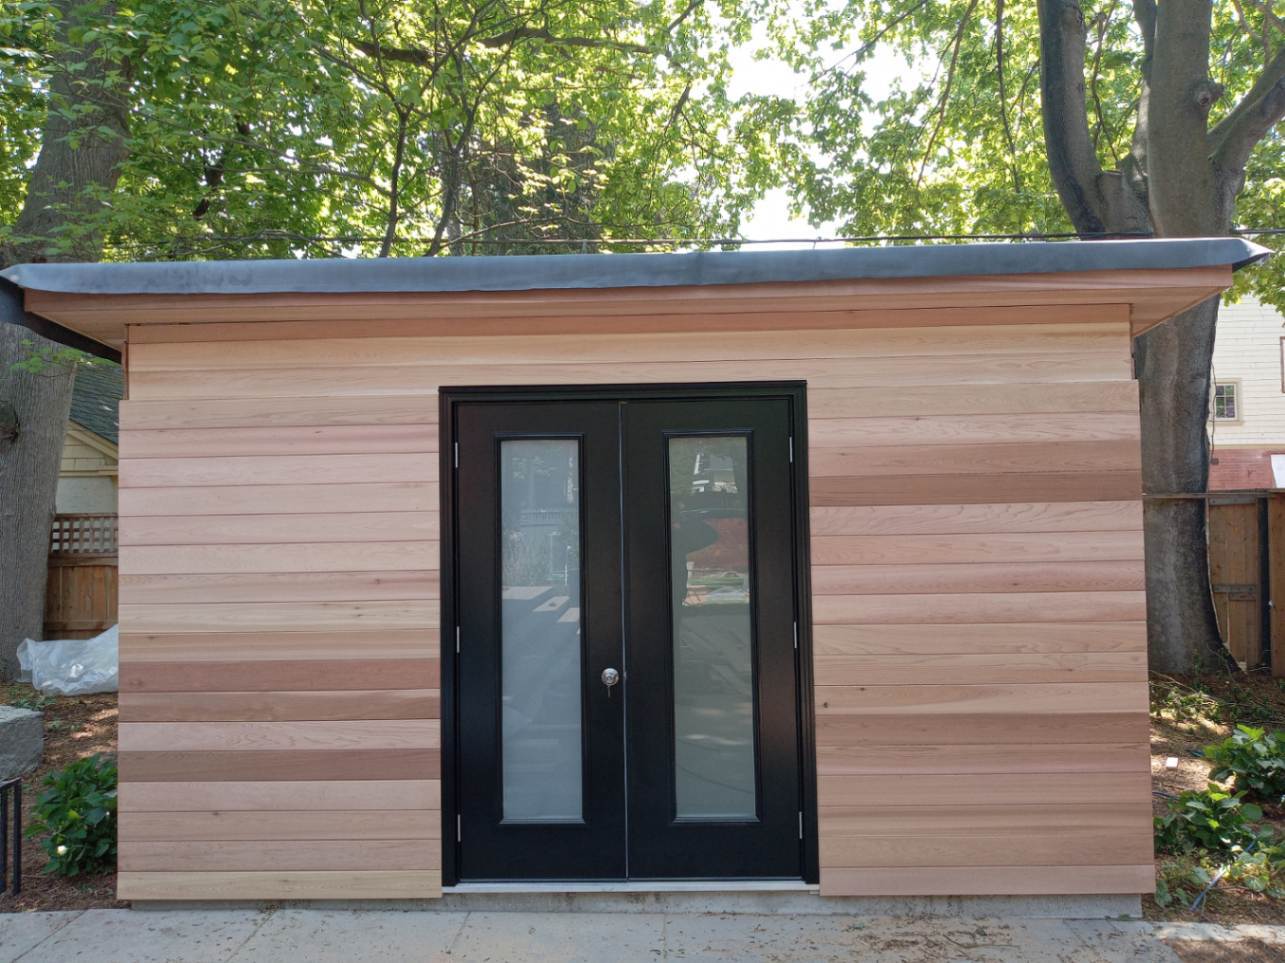 Front view of 7’x14' Urban Studio Home Studio located in Oakville, Ontario – Summerwood Products